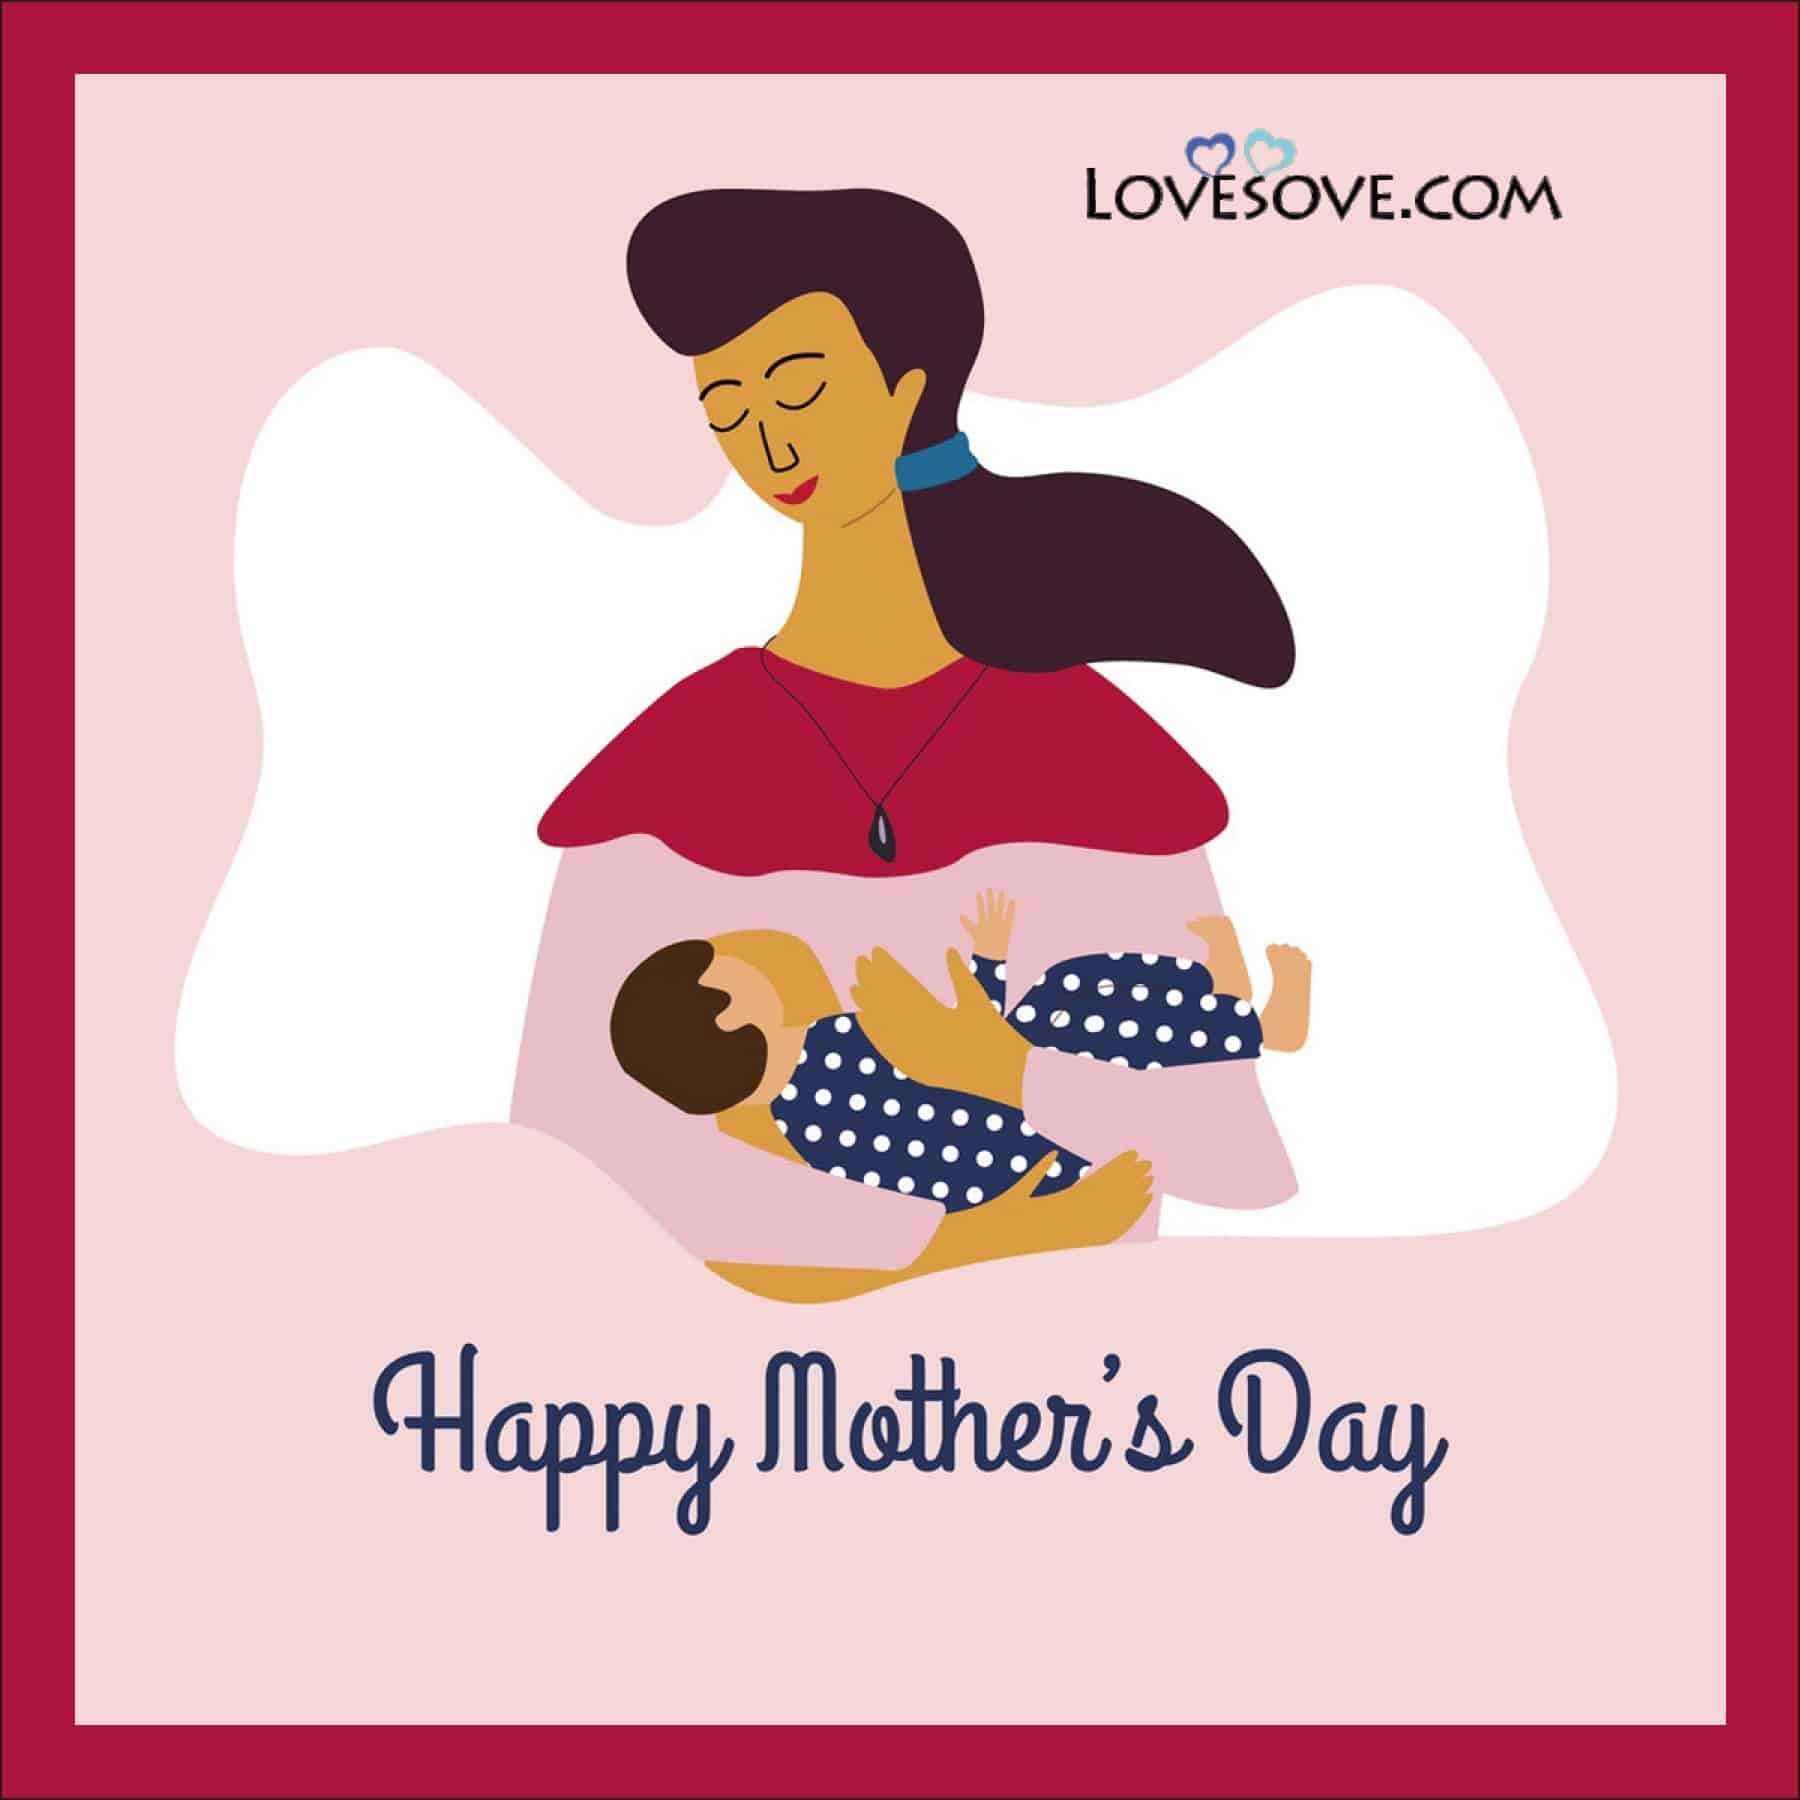 Mothers-Day-Wishes-Photos-Lovesove, , mothers day wishes photos lovesove